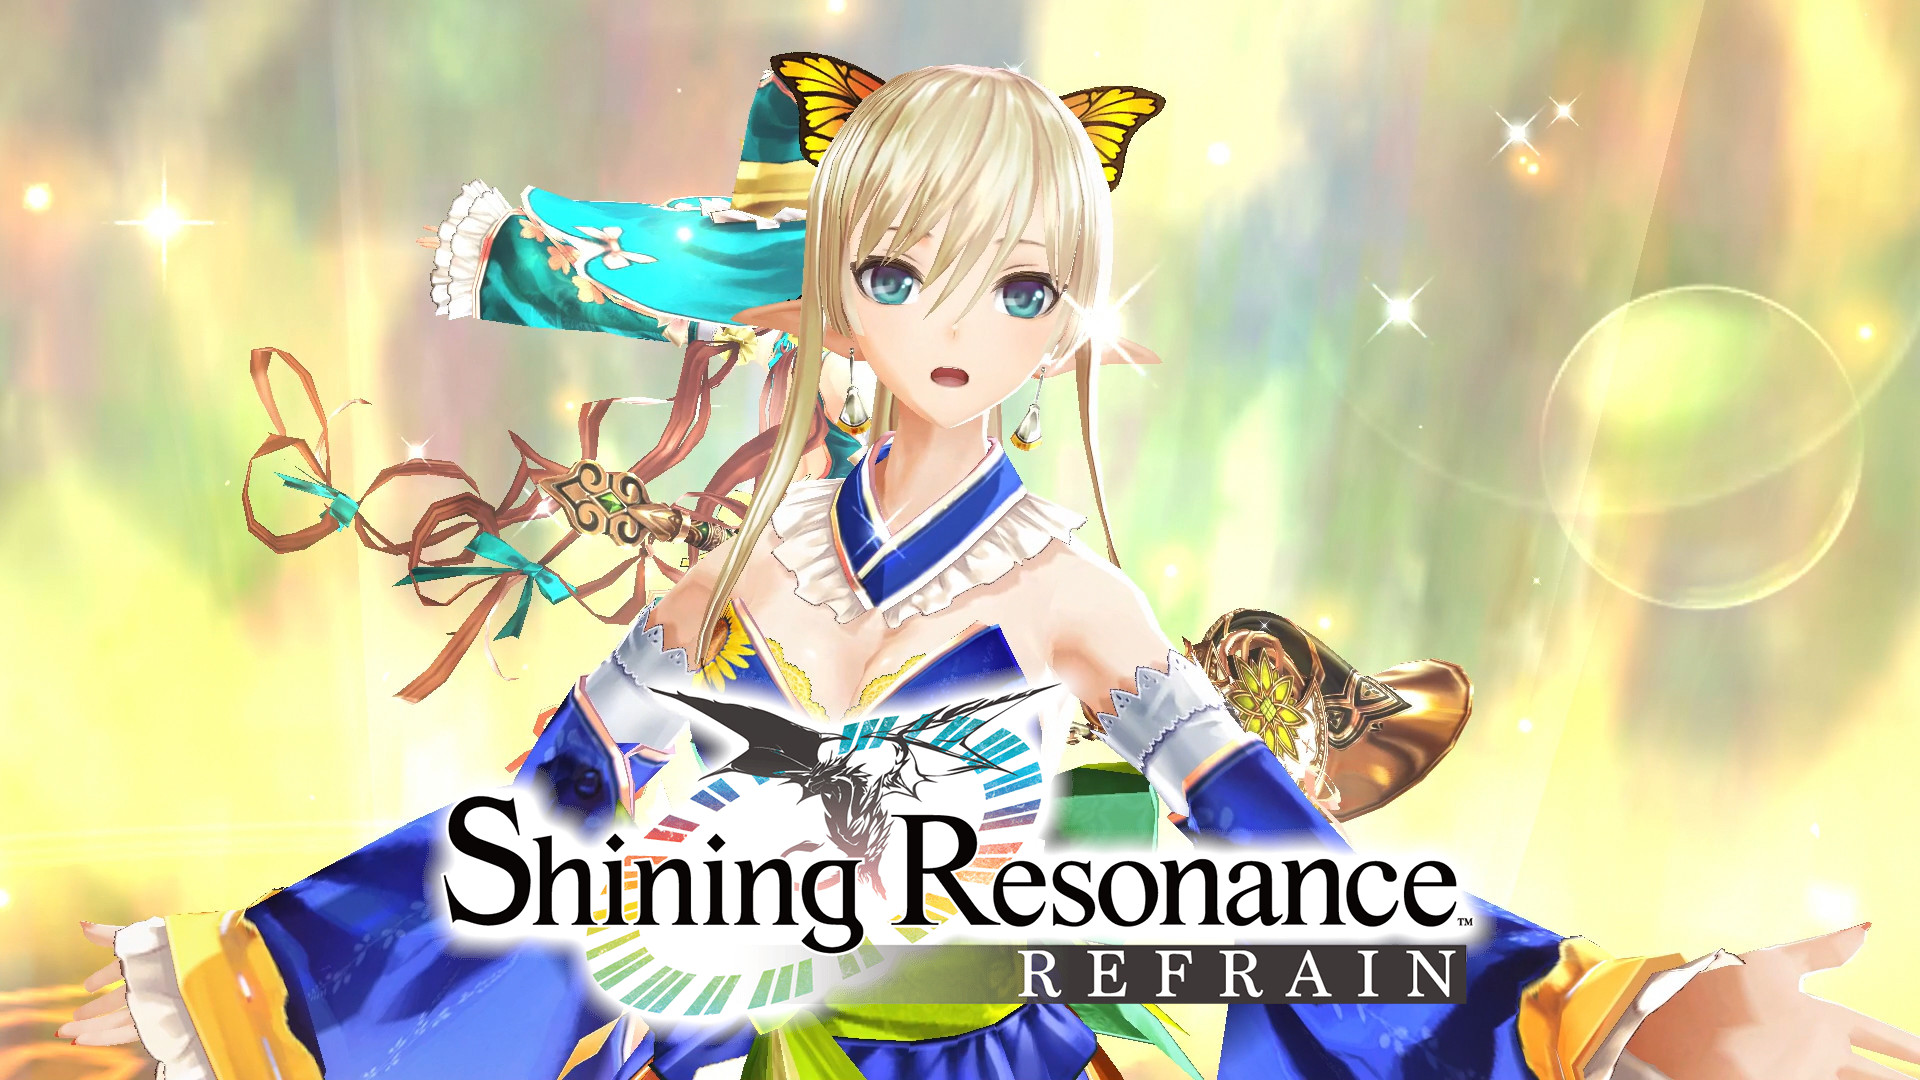 You Don’t Have To Keep Promises Made With Dead People – Shining Resonance Refrain Part 4 [JRPG Time]